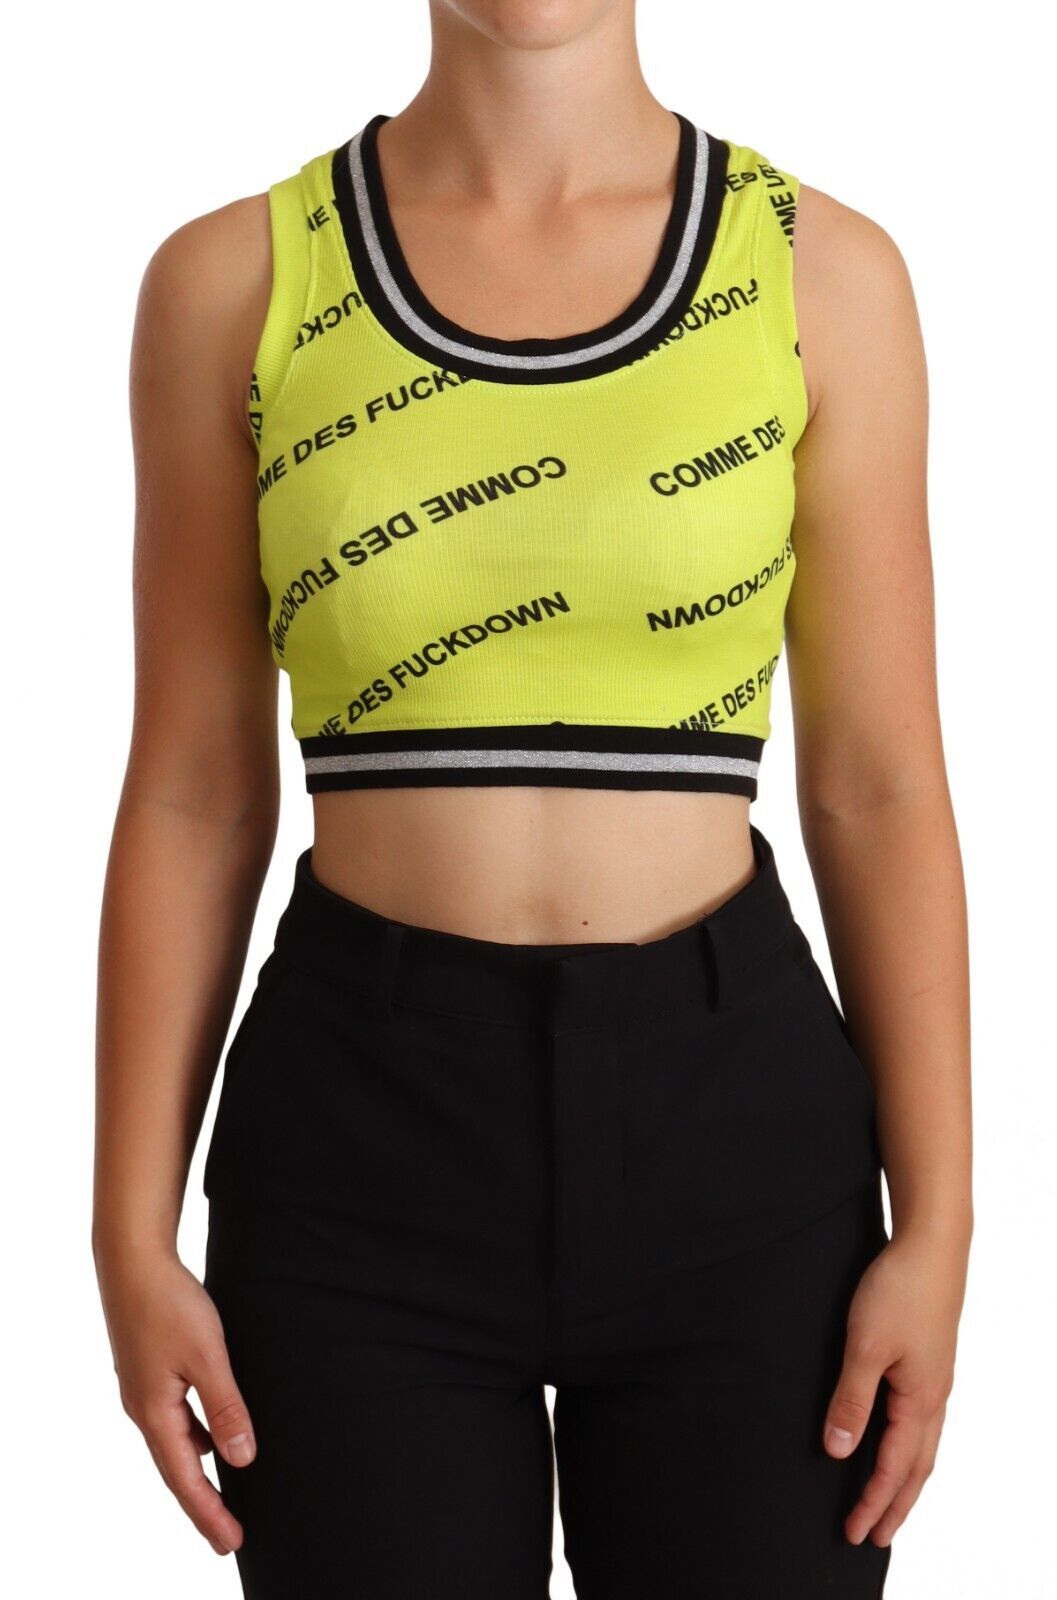 Chic Sleeveless Cropped Top in Vibrant Yellow